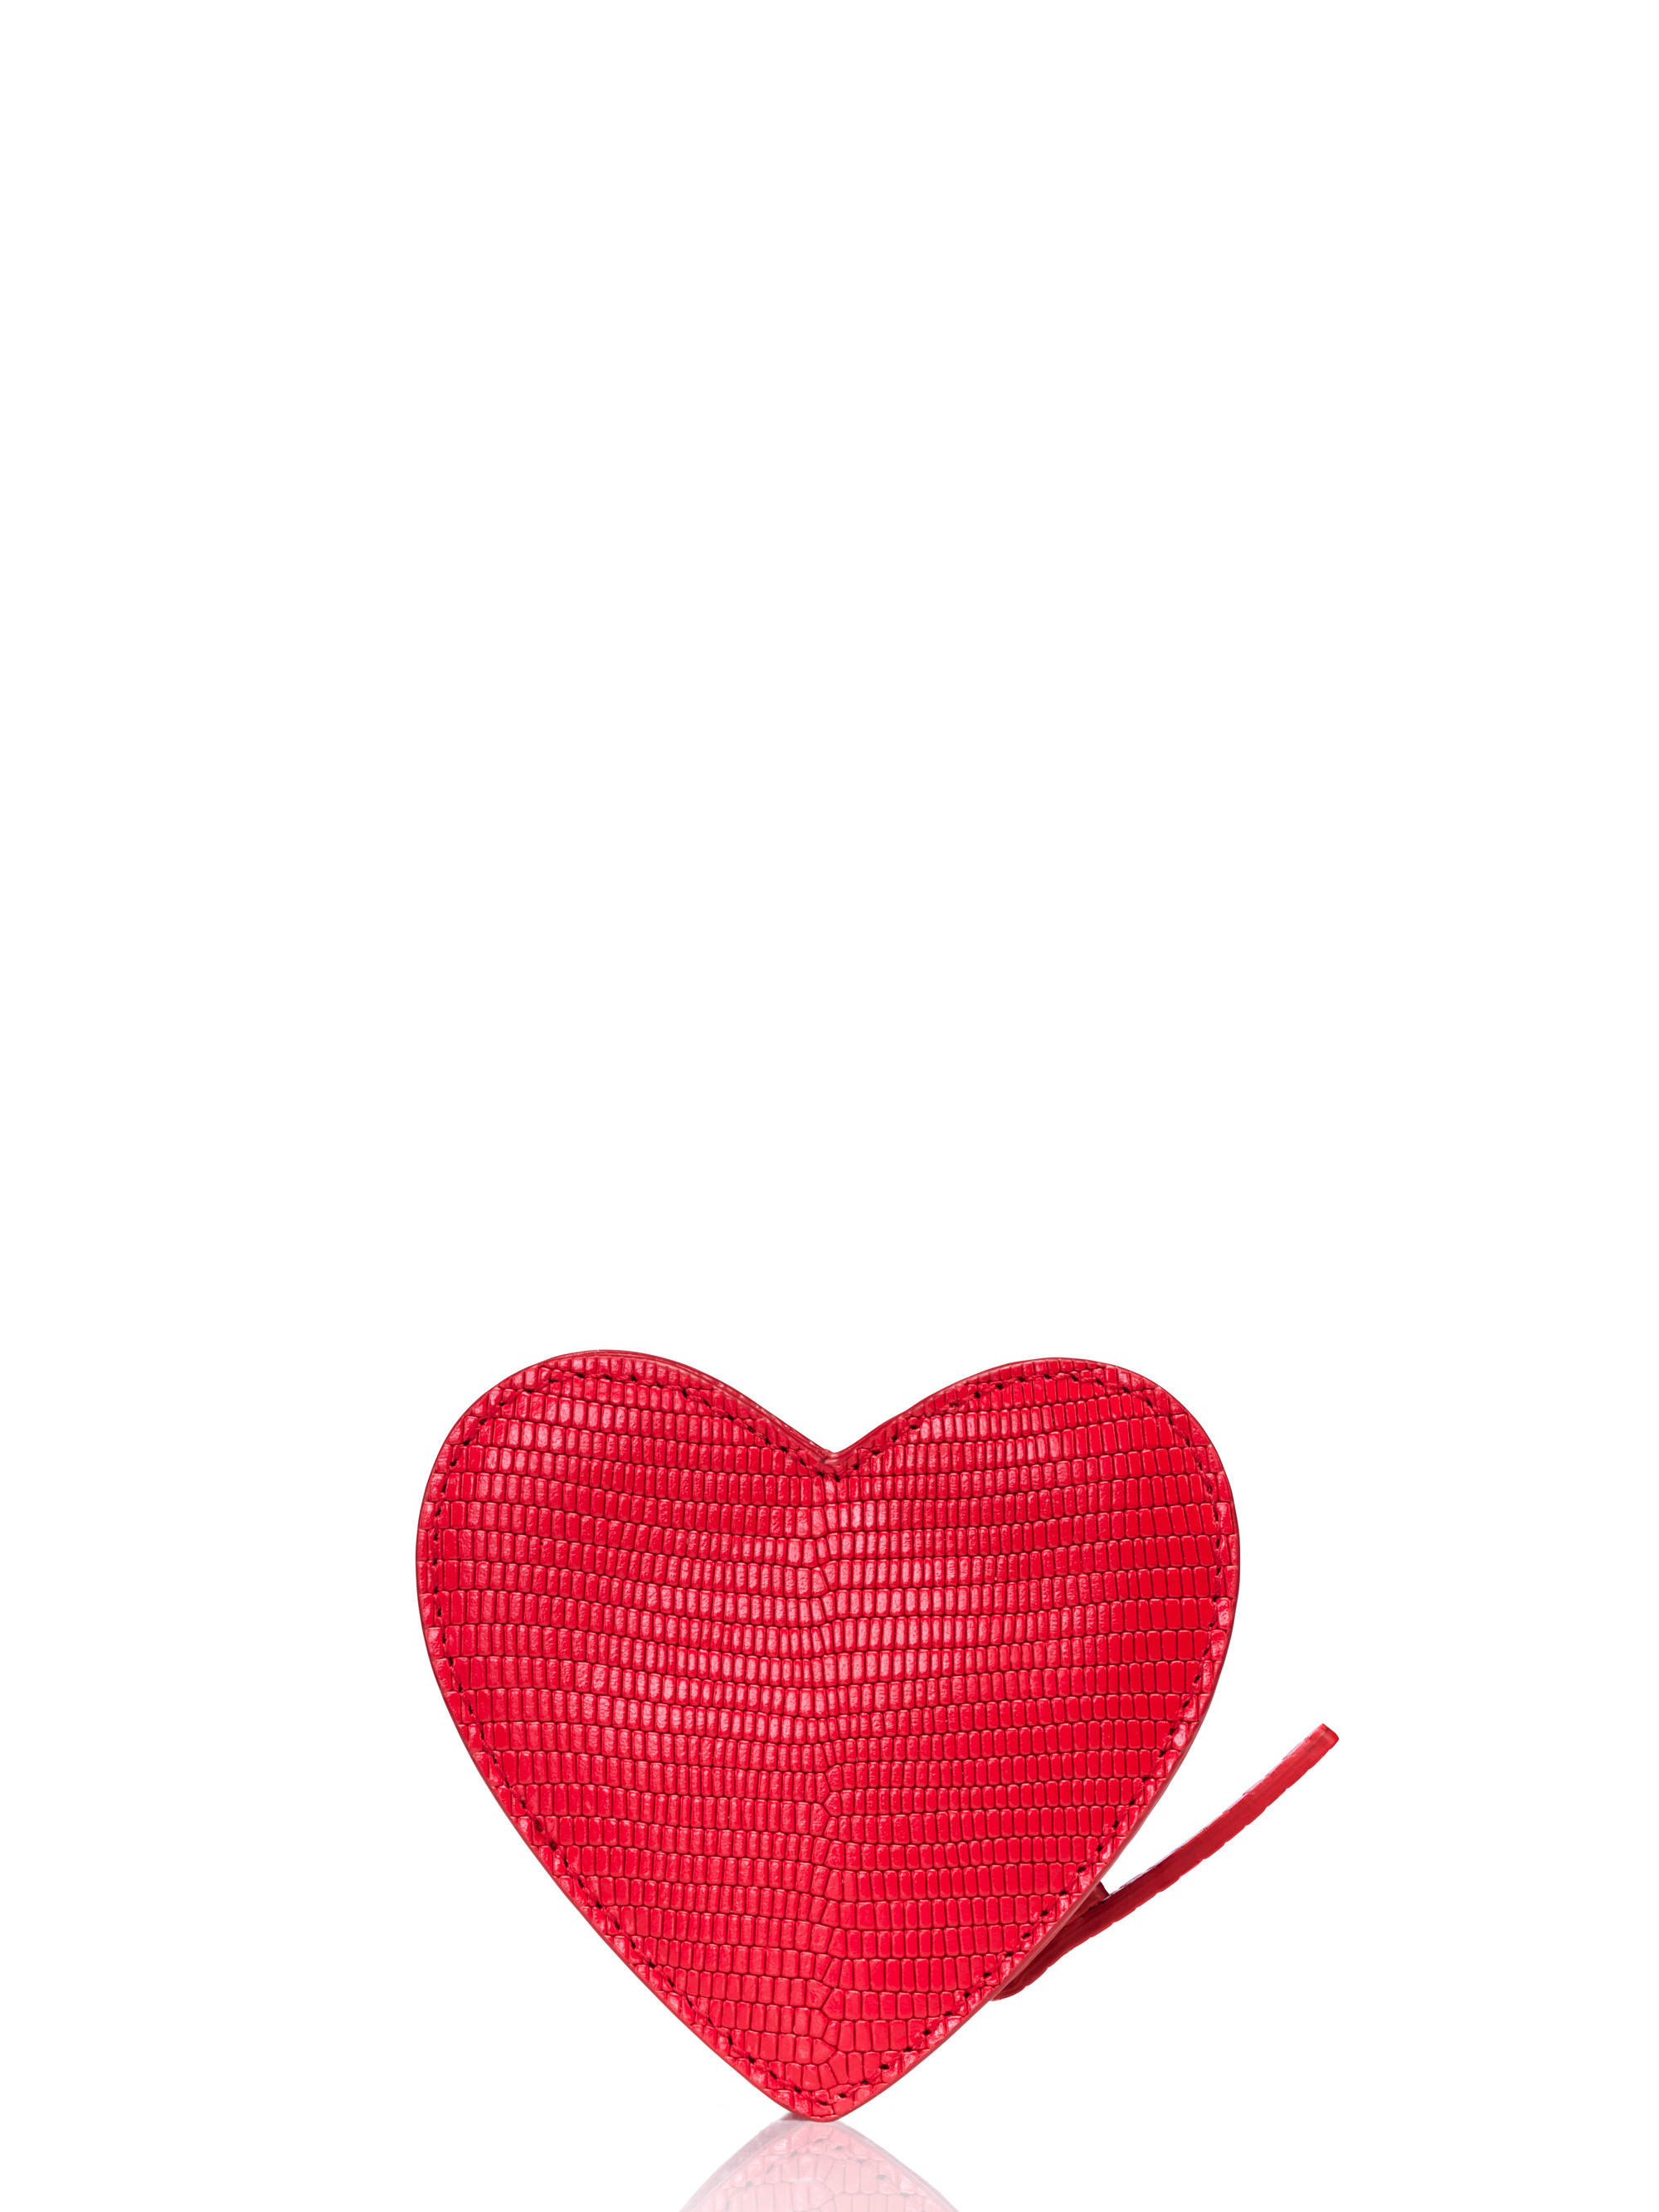 Lyst - Kate Spade New York Secret Admirer Heart Coin Purse in Red